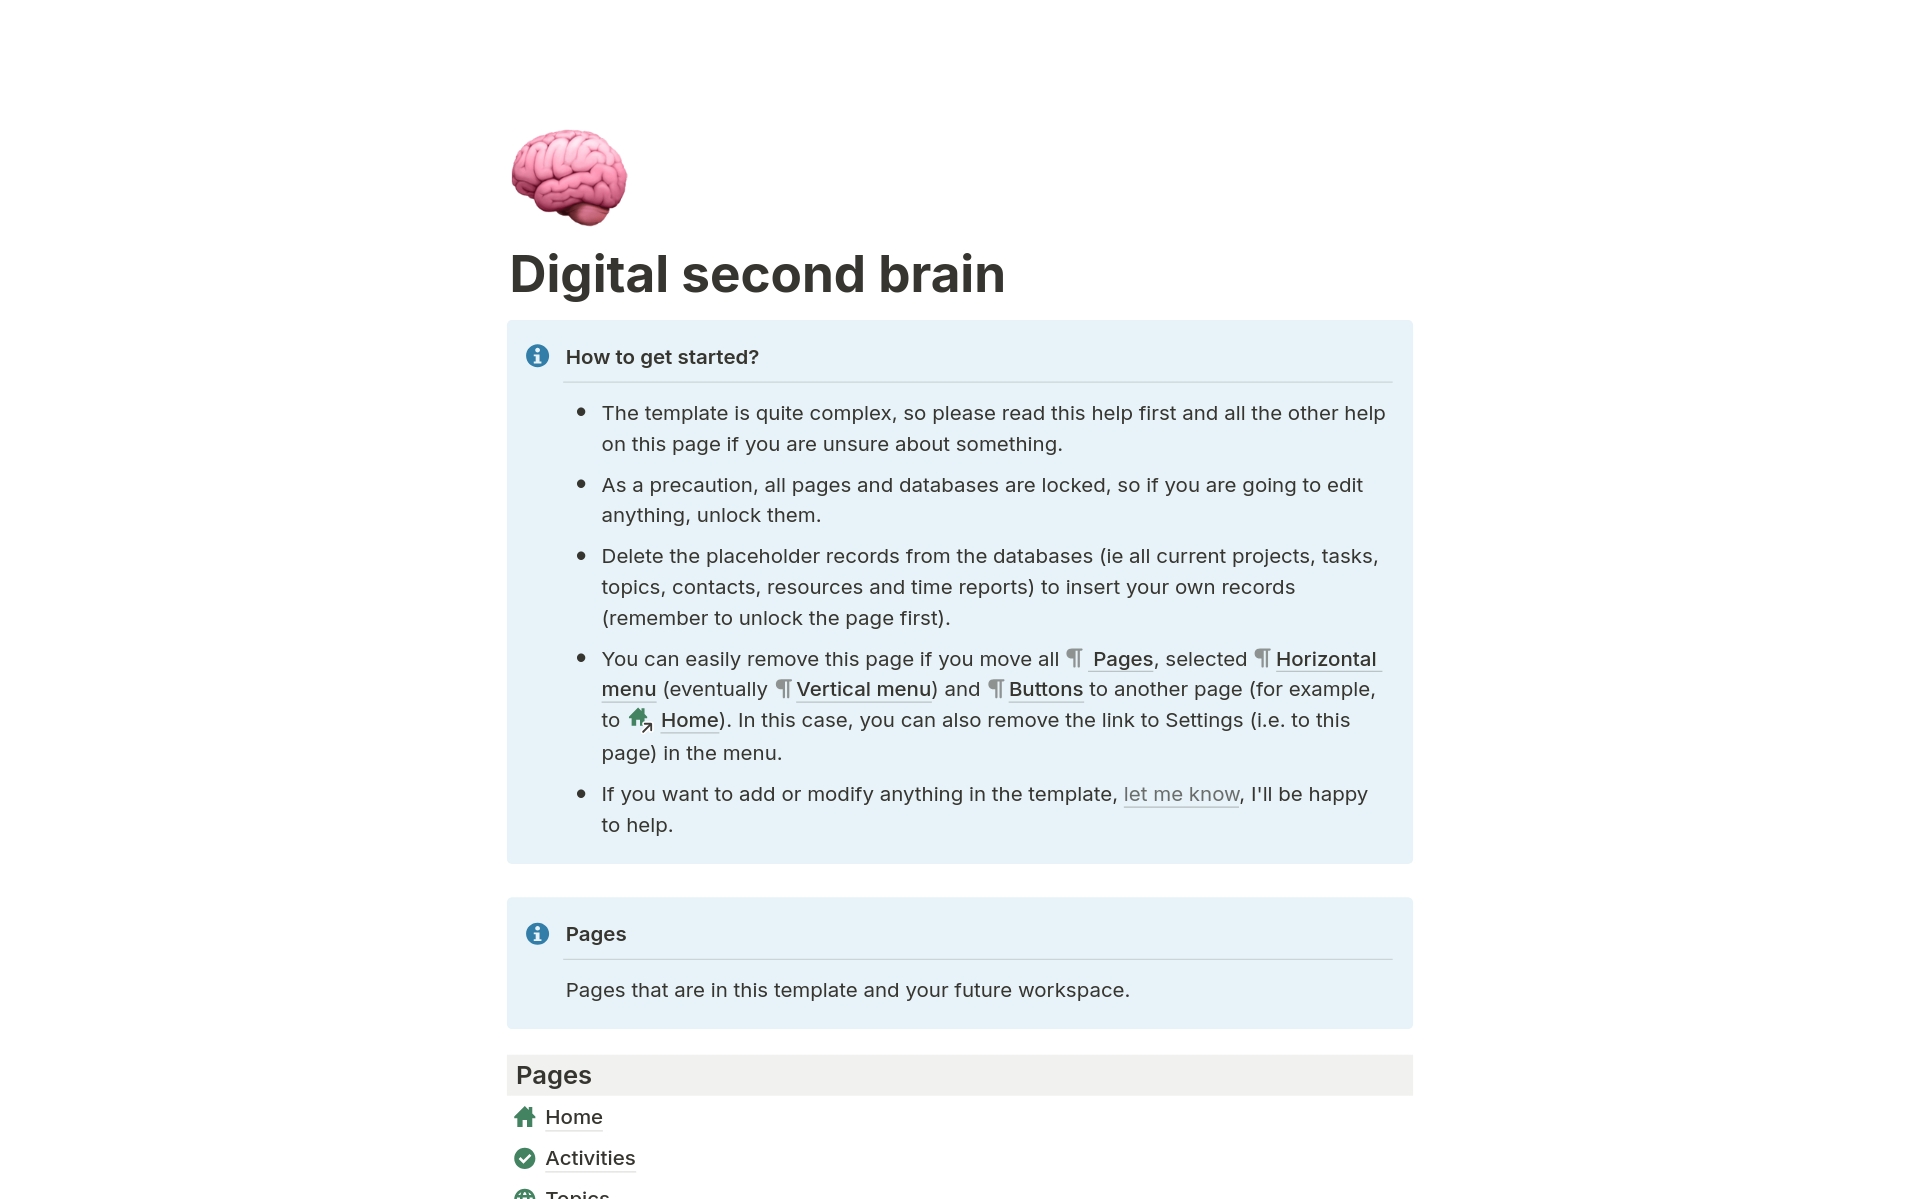 When you are overwhelmed, the second brain - the digital one in Notion - will help you.